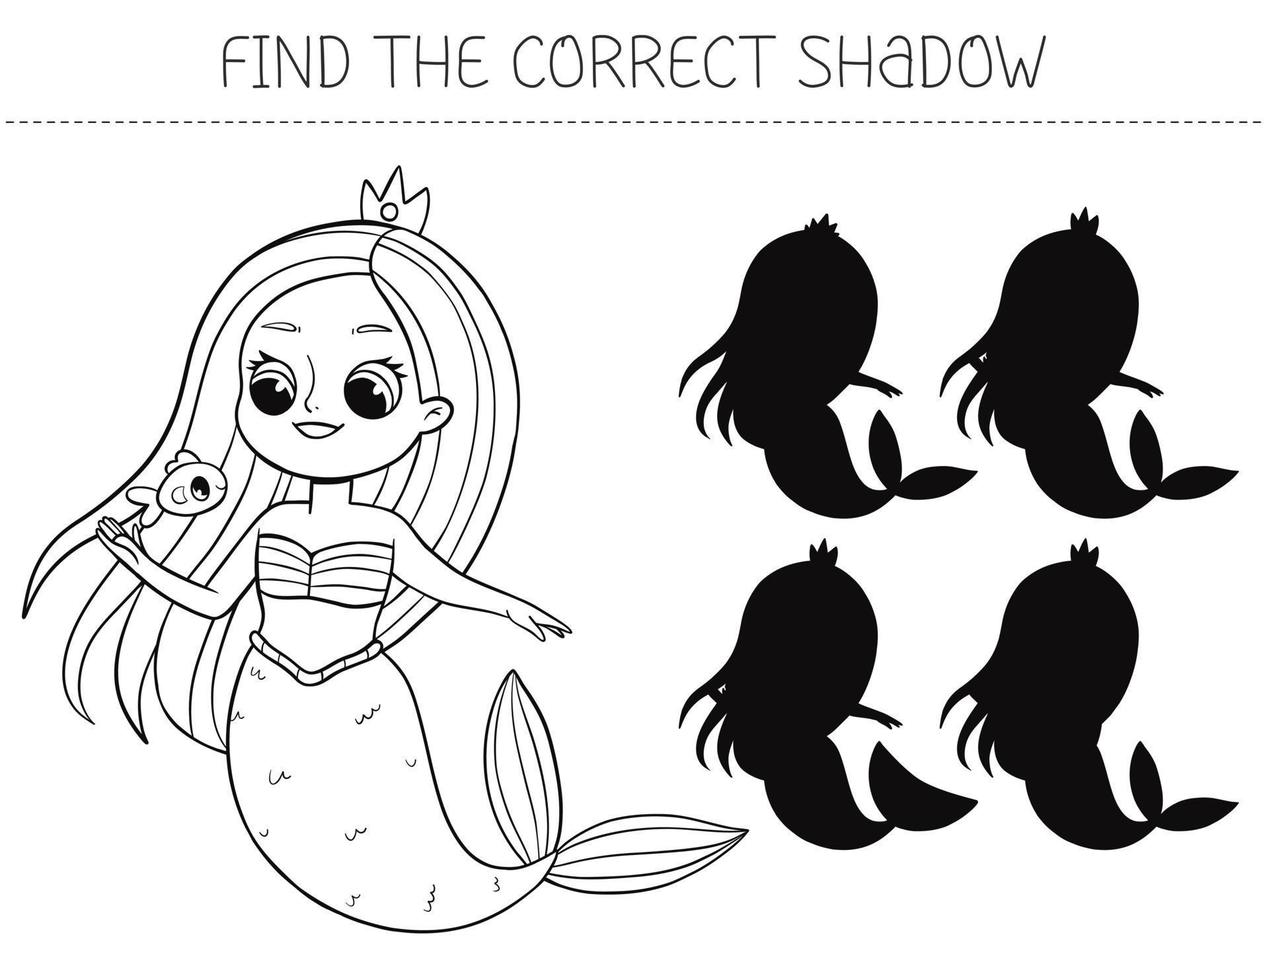 Find the correct shadow coloring book with mermaid. Coloring page educational game for kids. Cute cartoon mermaid. Shadow matching game. Vector illustration.